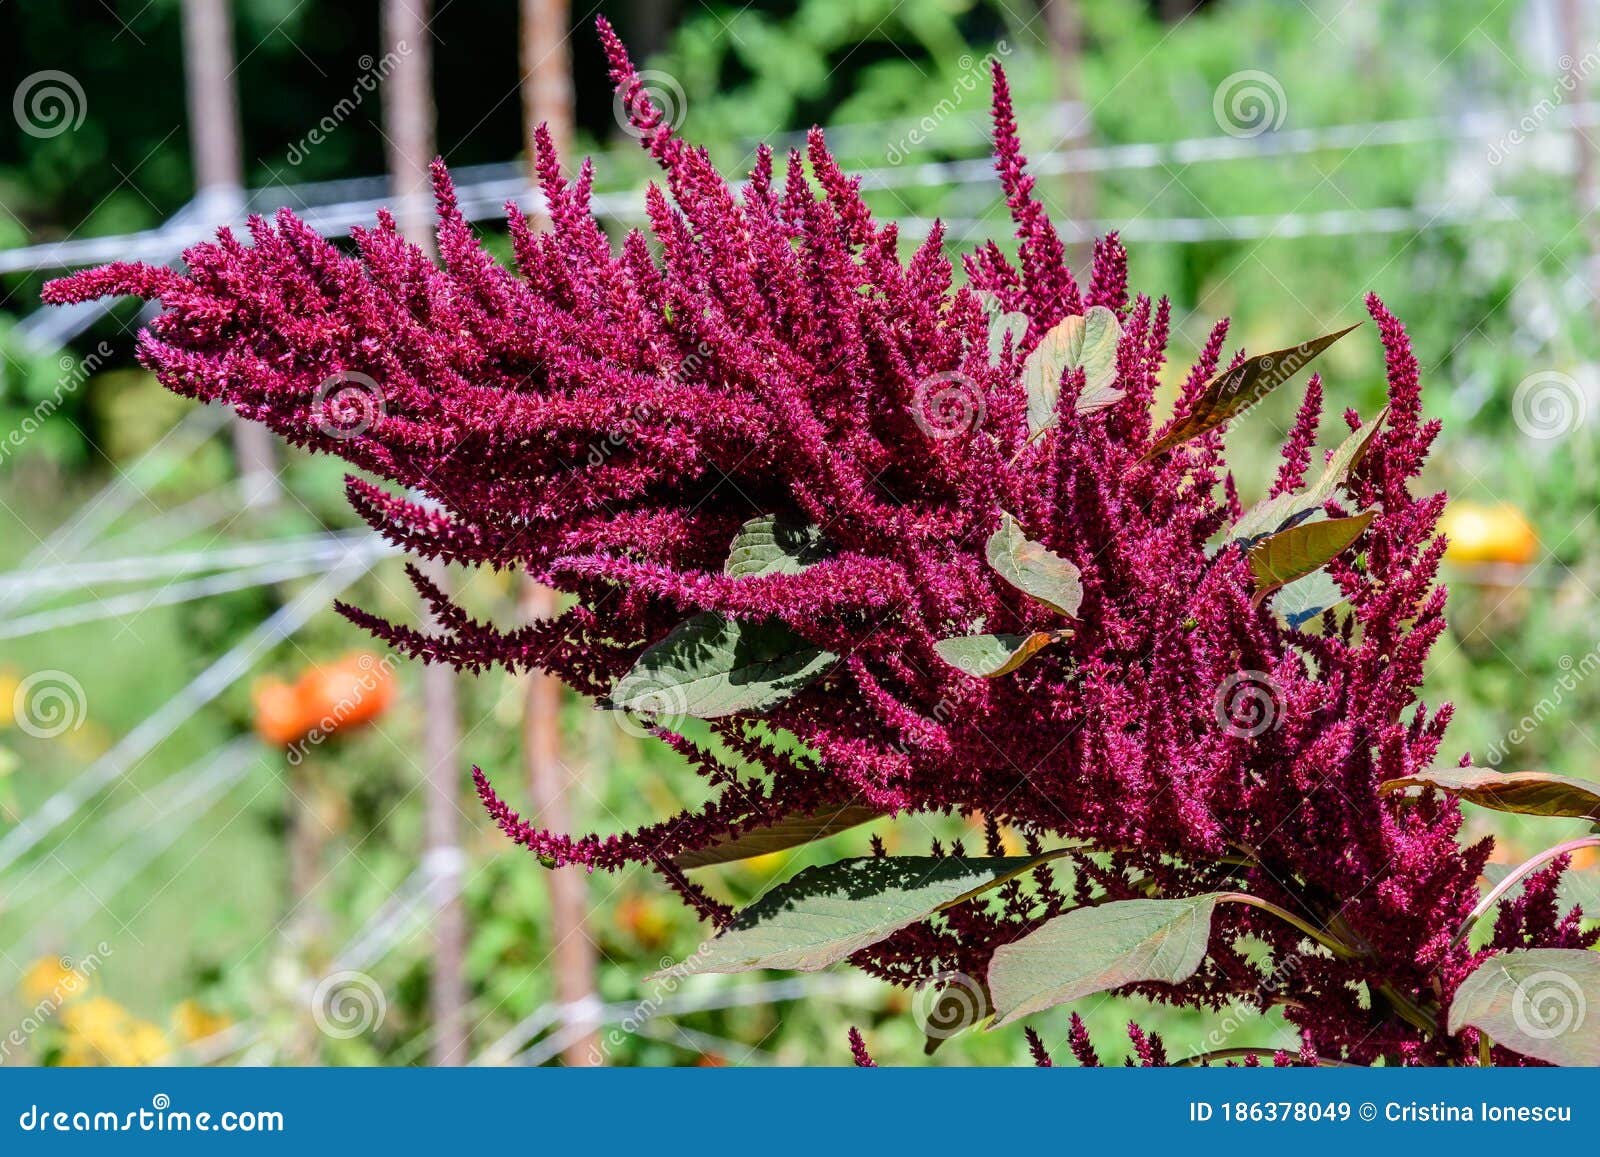 Many Red Flowers Of Amaranth Plant And Small Green Leaves In A Sunny Summer Vegetables Garden Side View Of Healthy Vegan Food Stock Image Image Of Leaves Outside